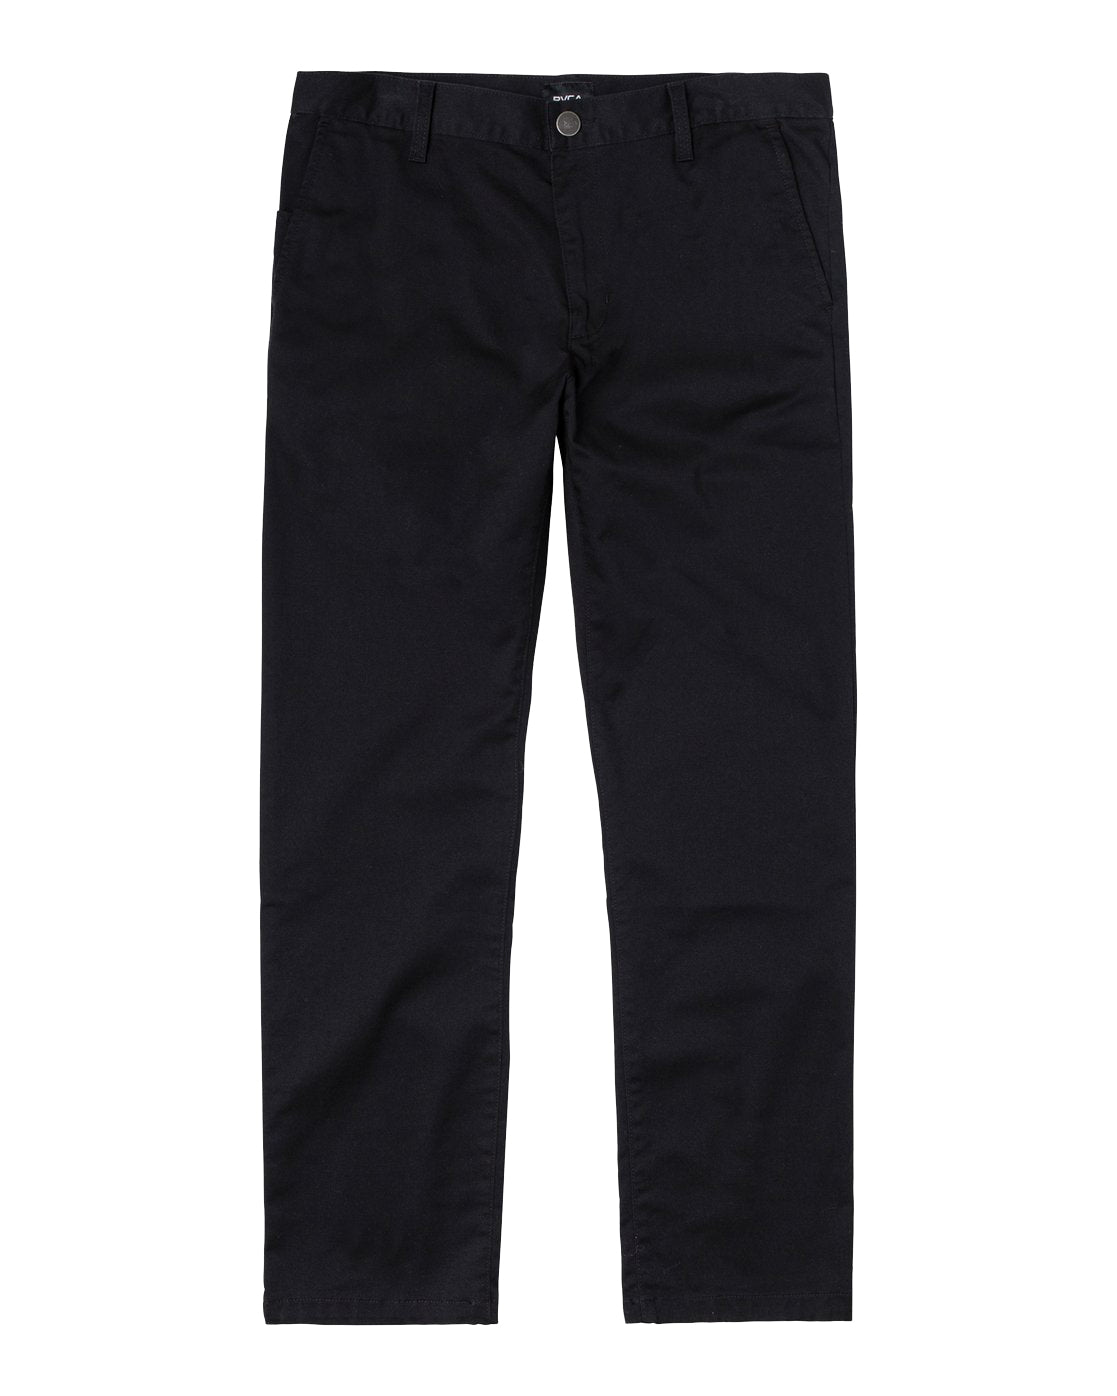 RVCA Weekend Stretch Straight Fit Pant BLK 36